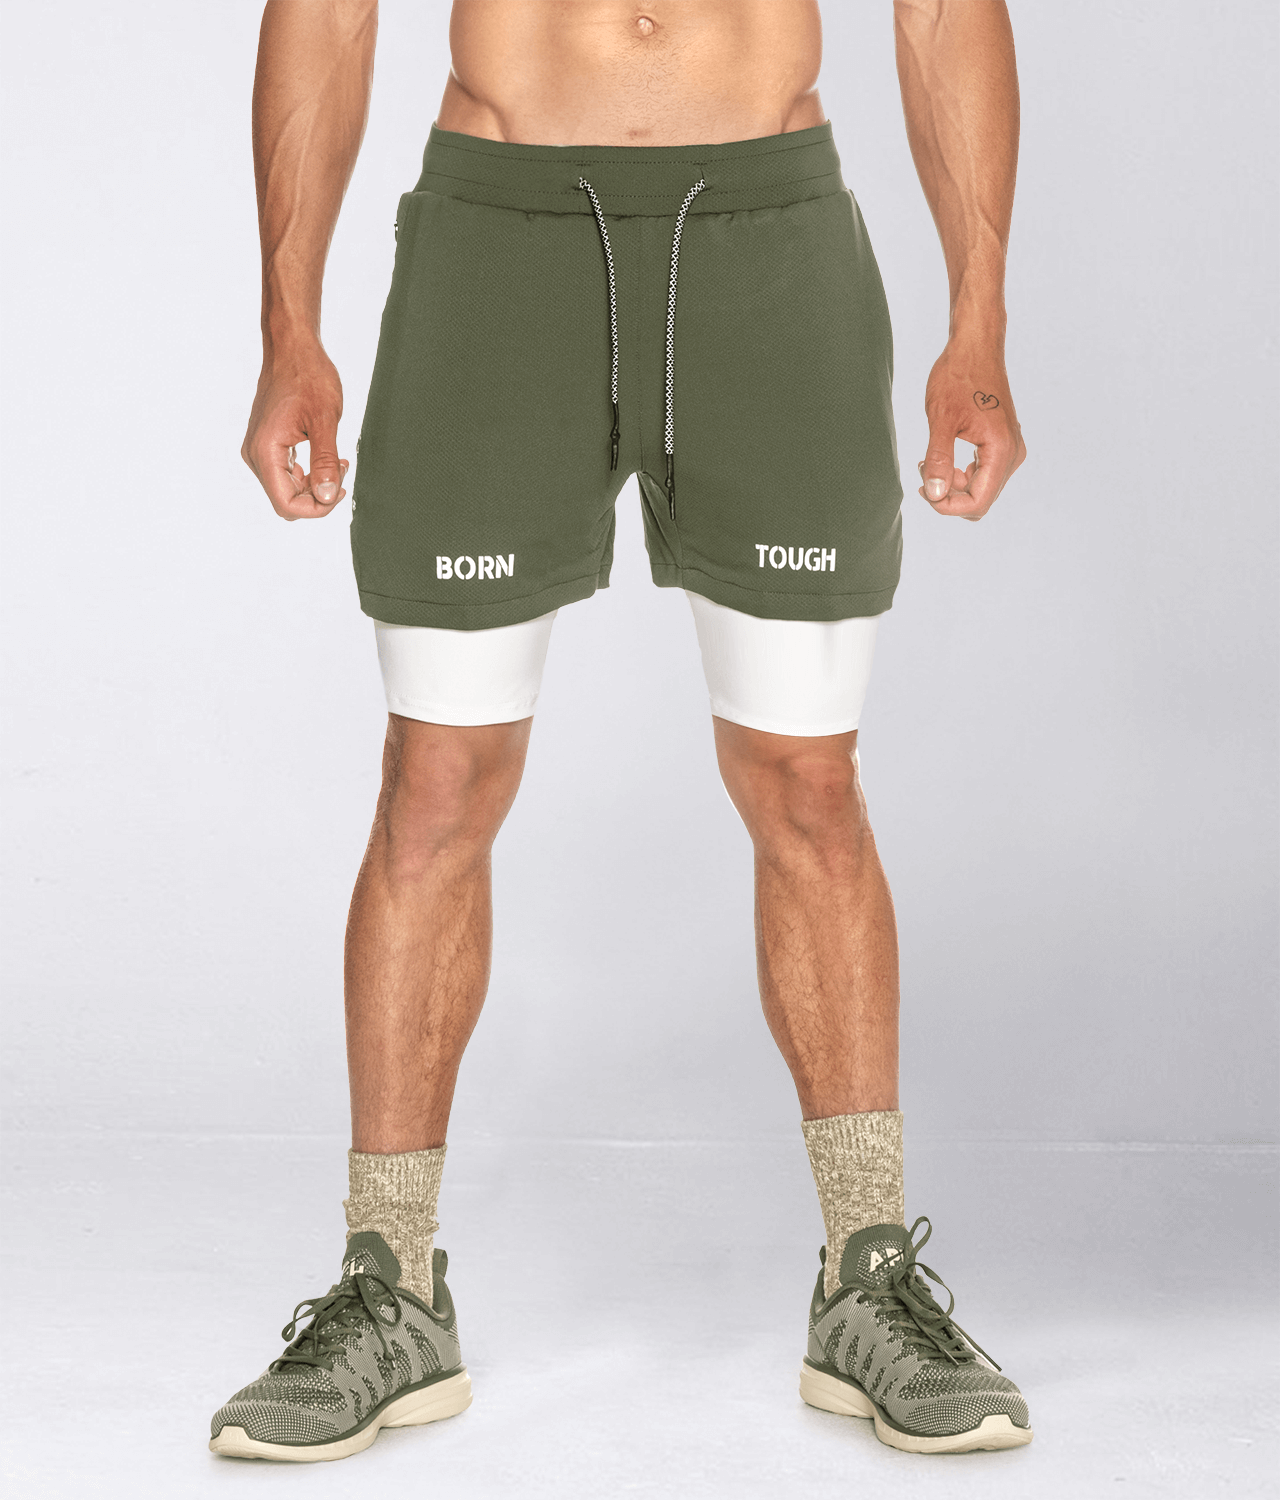 Born Tough Men's Gym Workout Shorts, 5 Inch Inseam Athletic Bodybuilding  Shorts for Men, Running Shorts with Liner Pocket (as1, Alpha, s, Regular,  Regular, Military Green) at  Men's Clothing store